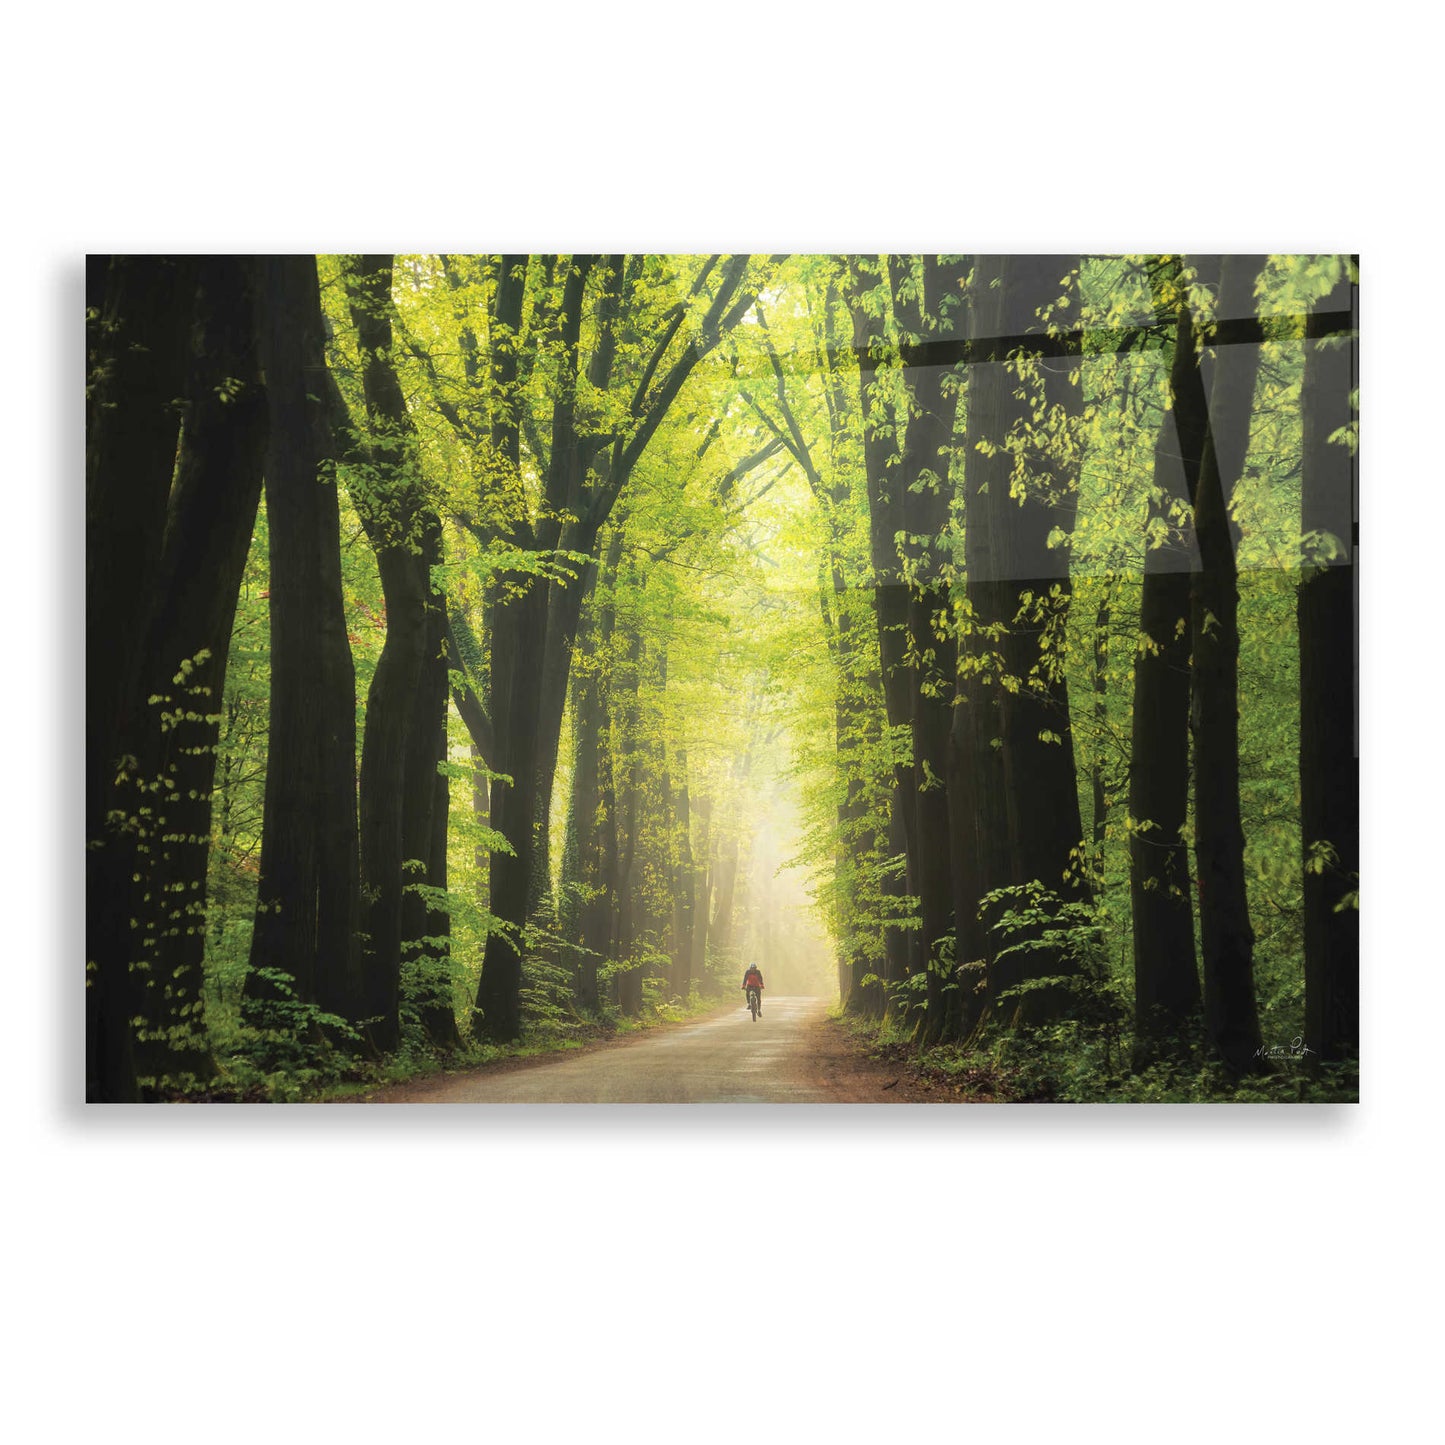 Epic Art 'Among Giants in Springtime' by Martin Podt, Acrylic Glass Wall Art,24x16